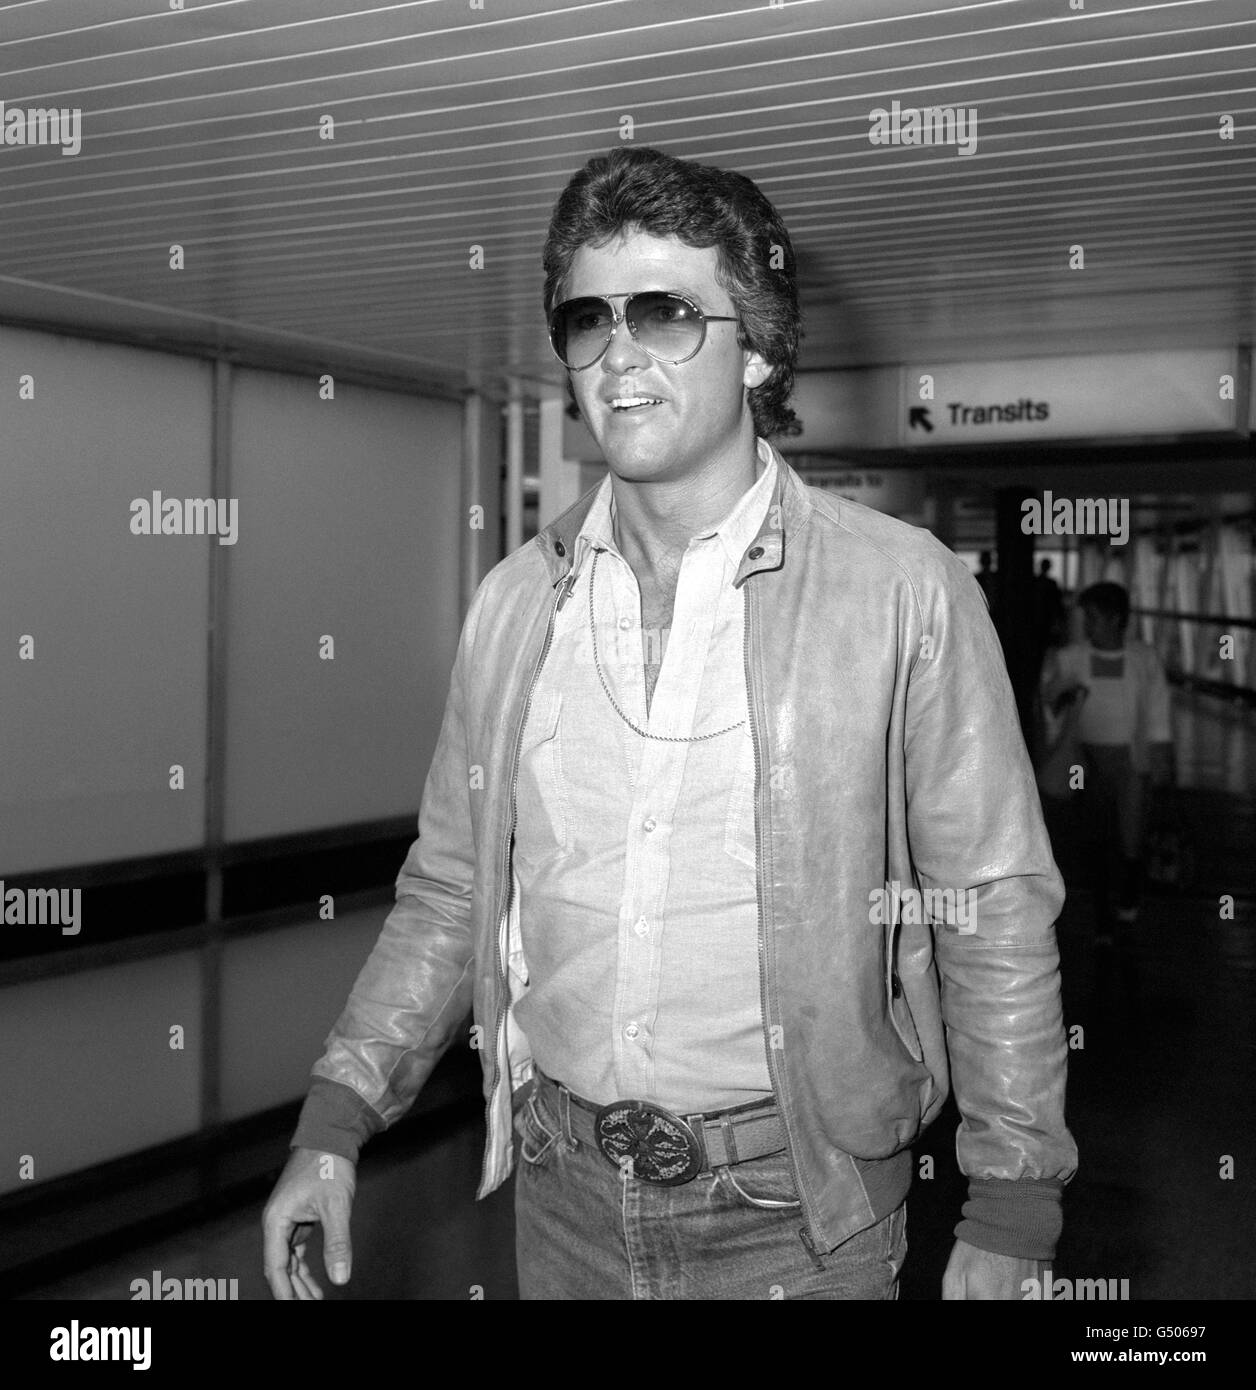 American actor Patrick Duffy, who plays Bobby Ewing in the television series 'Dallas', arriving at Heathrow Airport, London, from Los Angeles to make a promotional video. Stock Photo